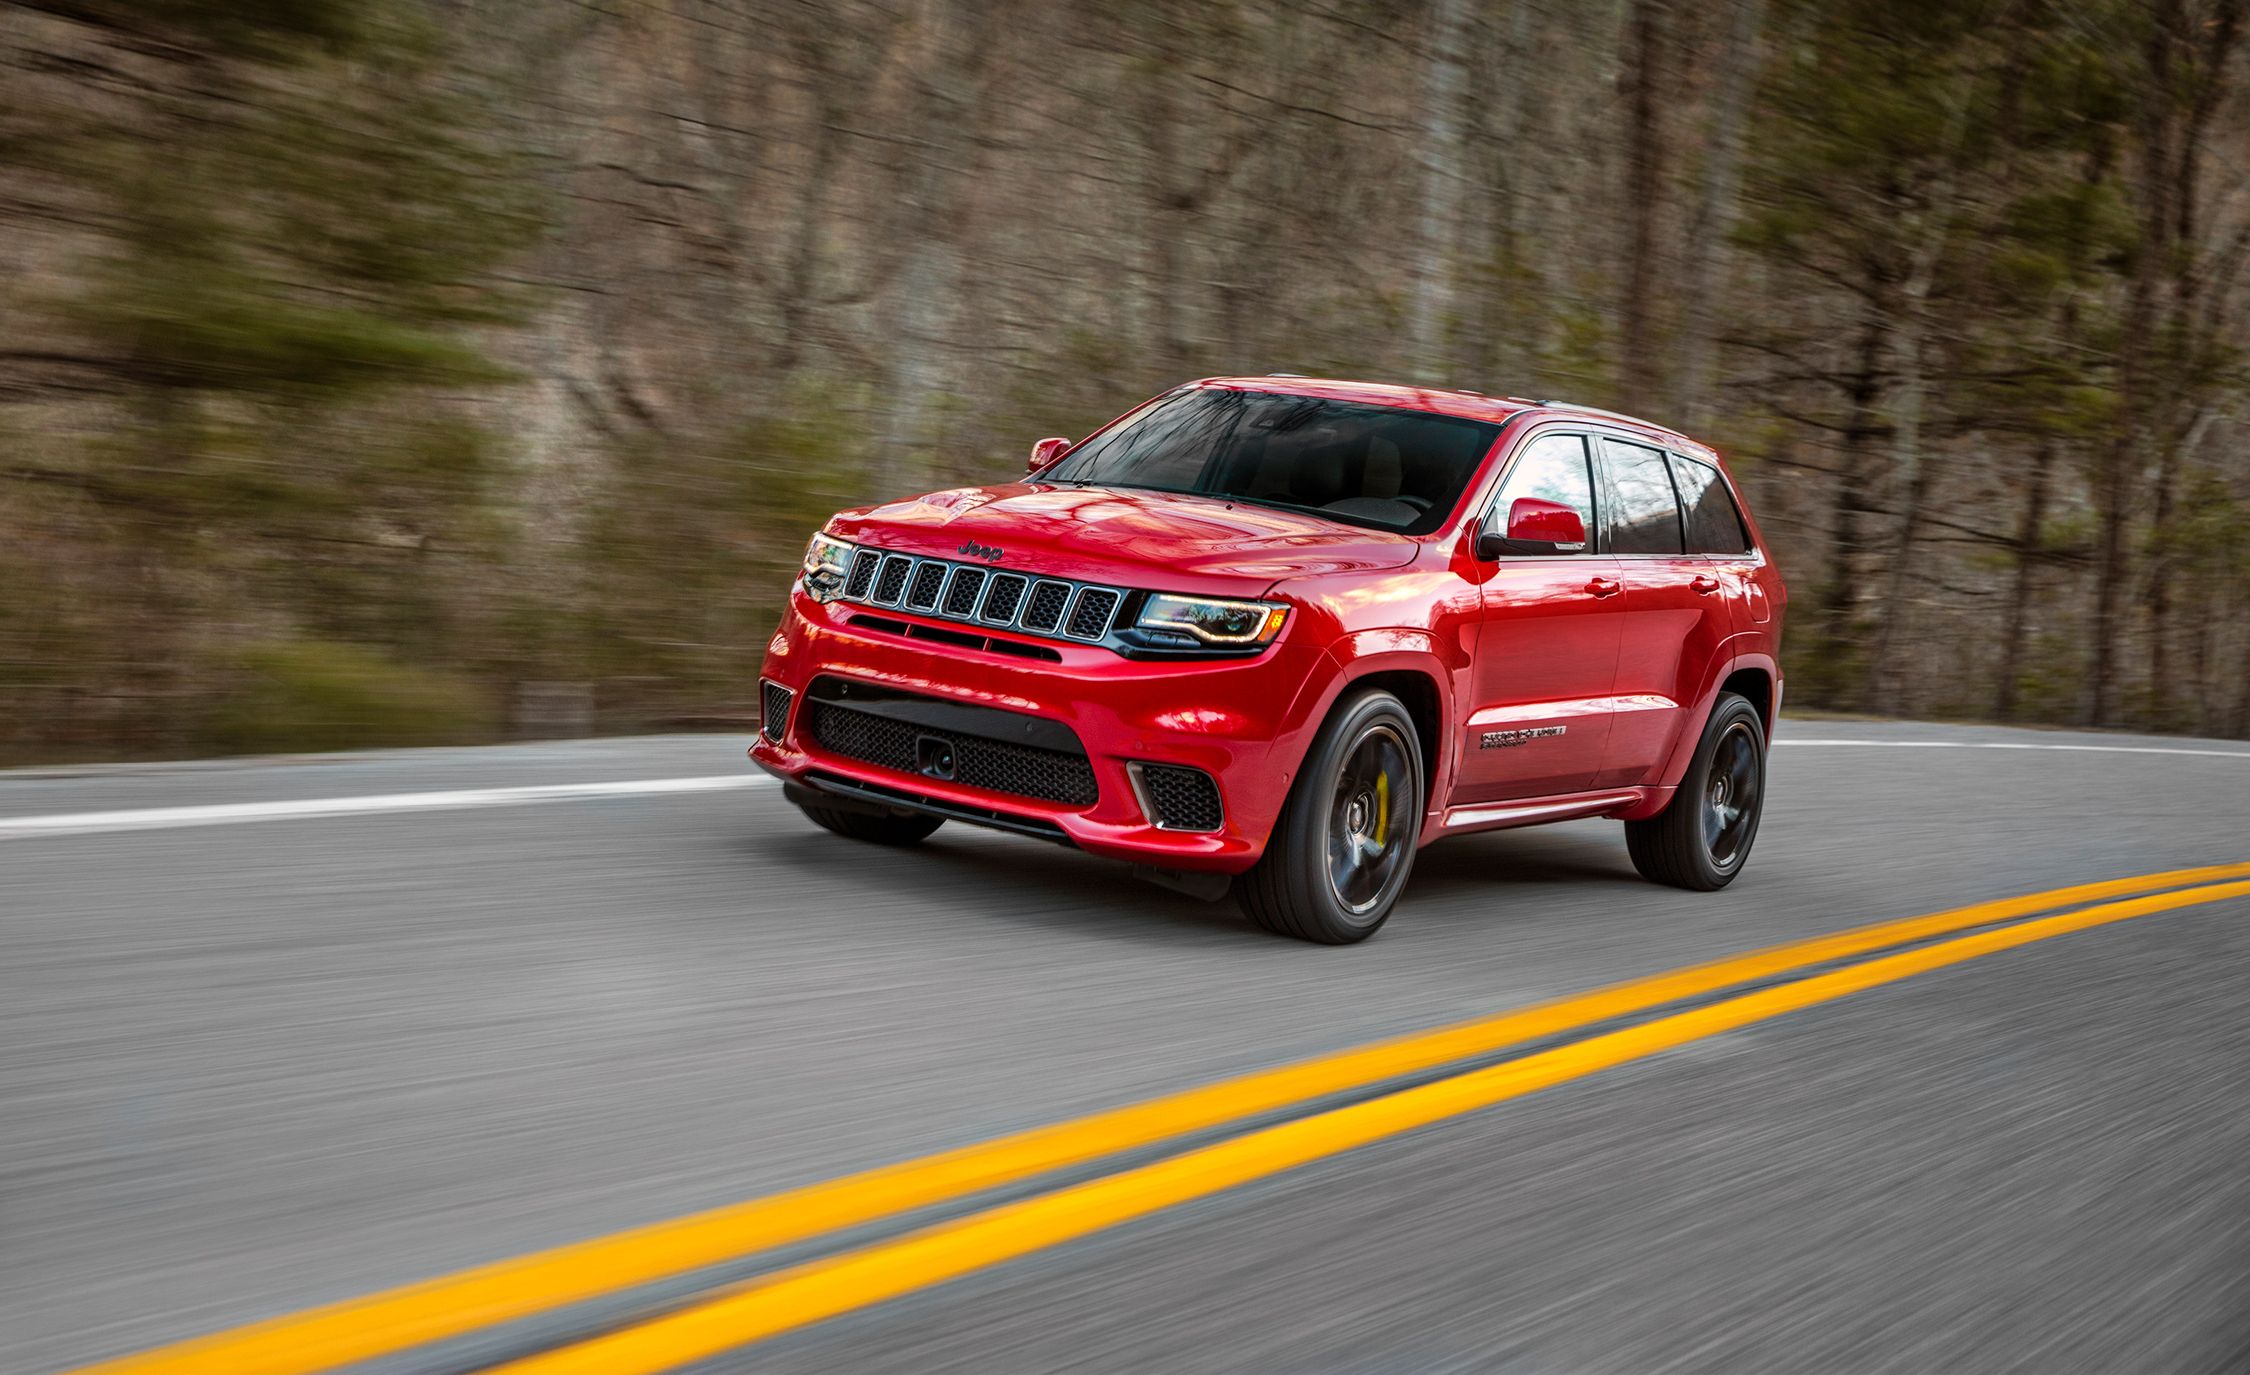 2018-jeep-grand-cherokee-trackhawk-first-drive-review-car-and-driver-photo-689683-s-original.jpg